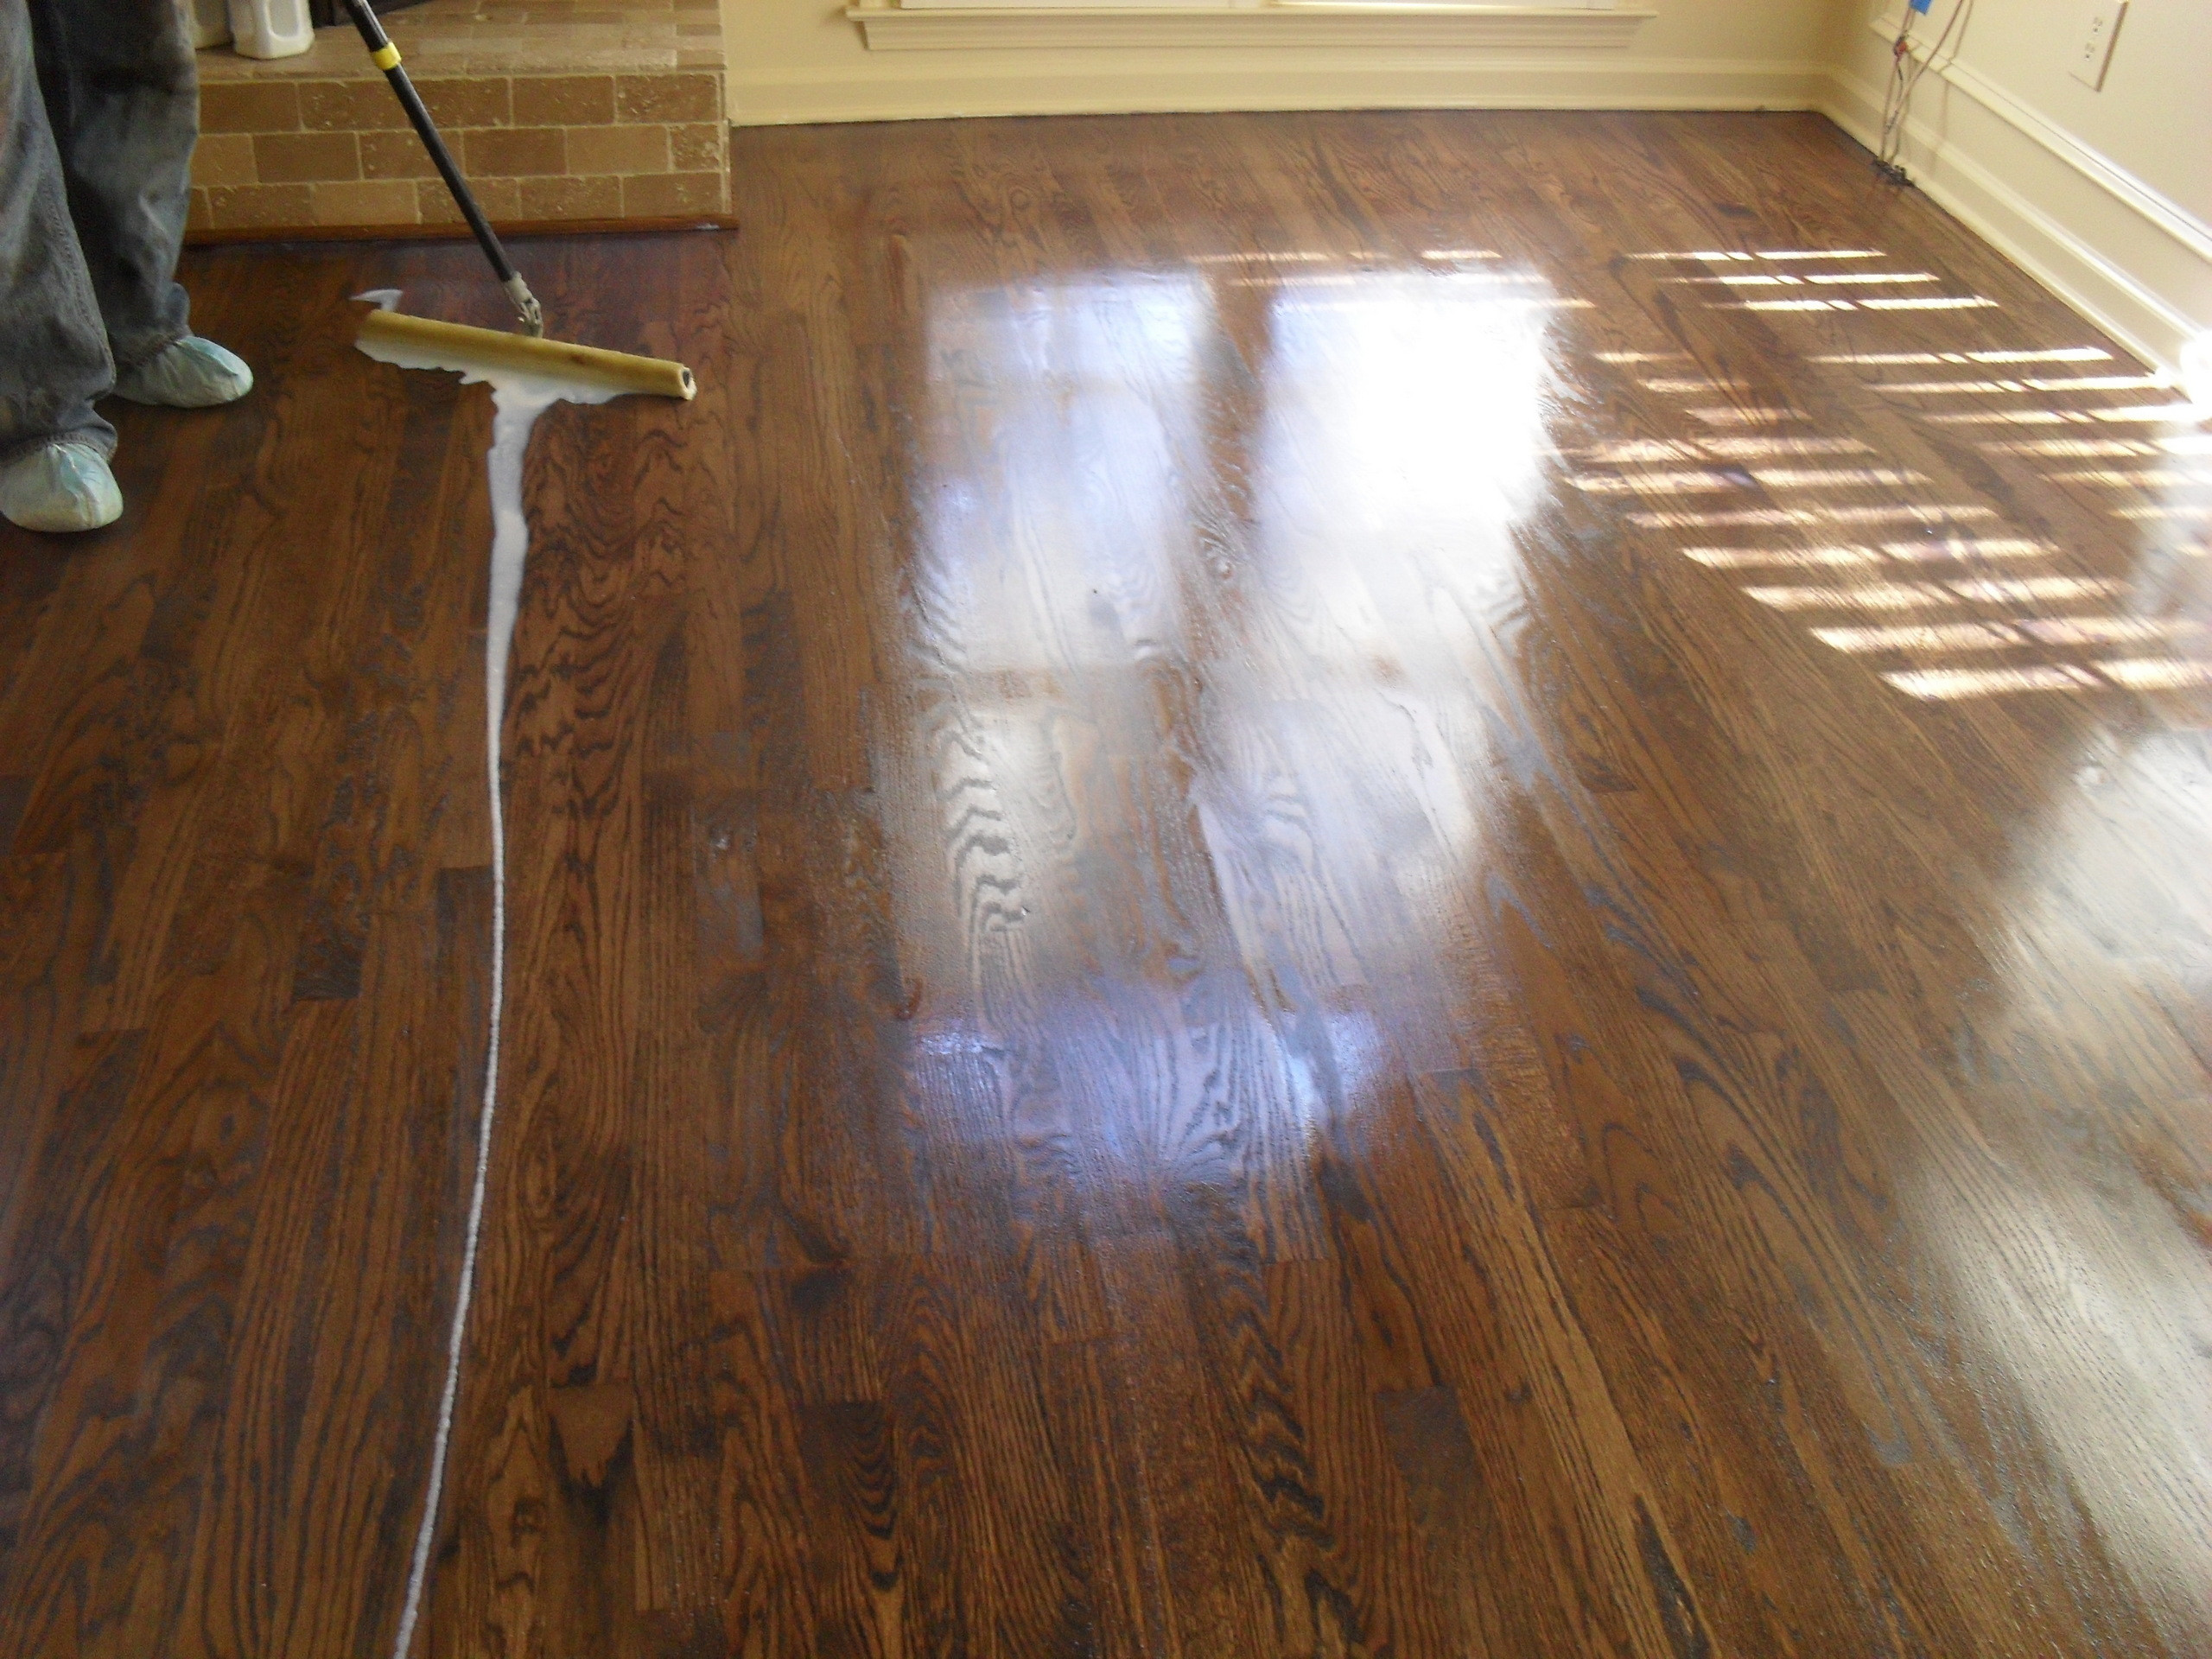 15 Fantastic Hardwood Floor Cleaning Services Los Angeles 2023 free download hardwood floor cleaning services los angeles of hardwood floor refinishing chicago jacobean stained fir wood floors within hardwood floor refinishing chicago will refinishingod floors pet st